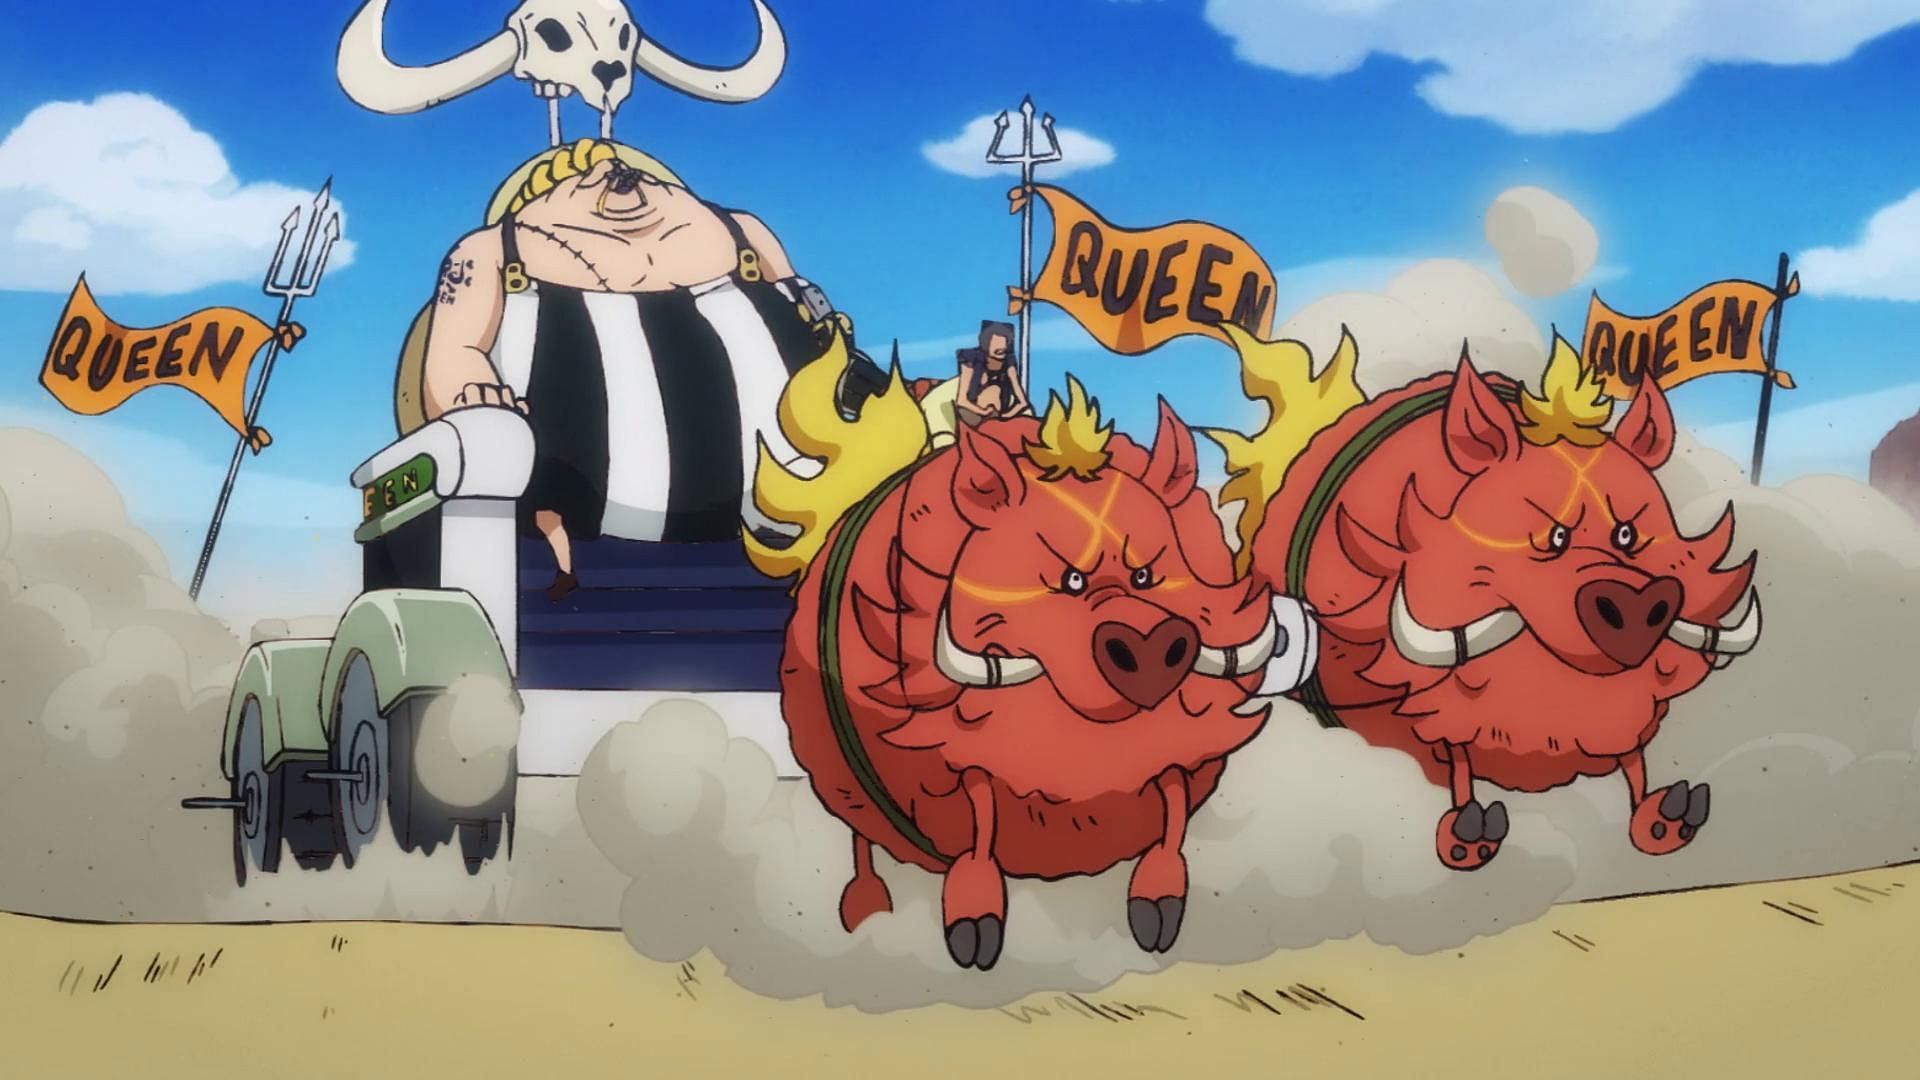 Queen Calamity in the One Piece anime (Image via TOEI Animation)